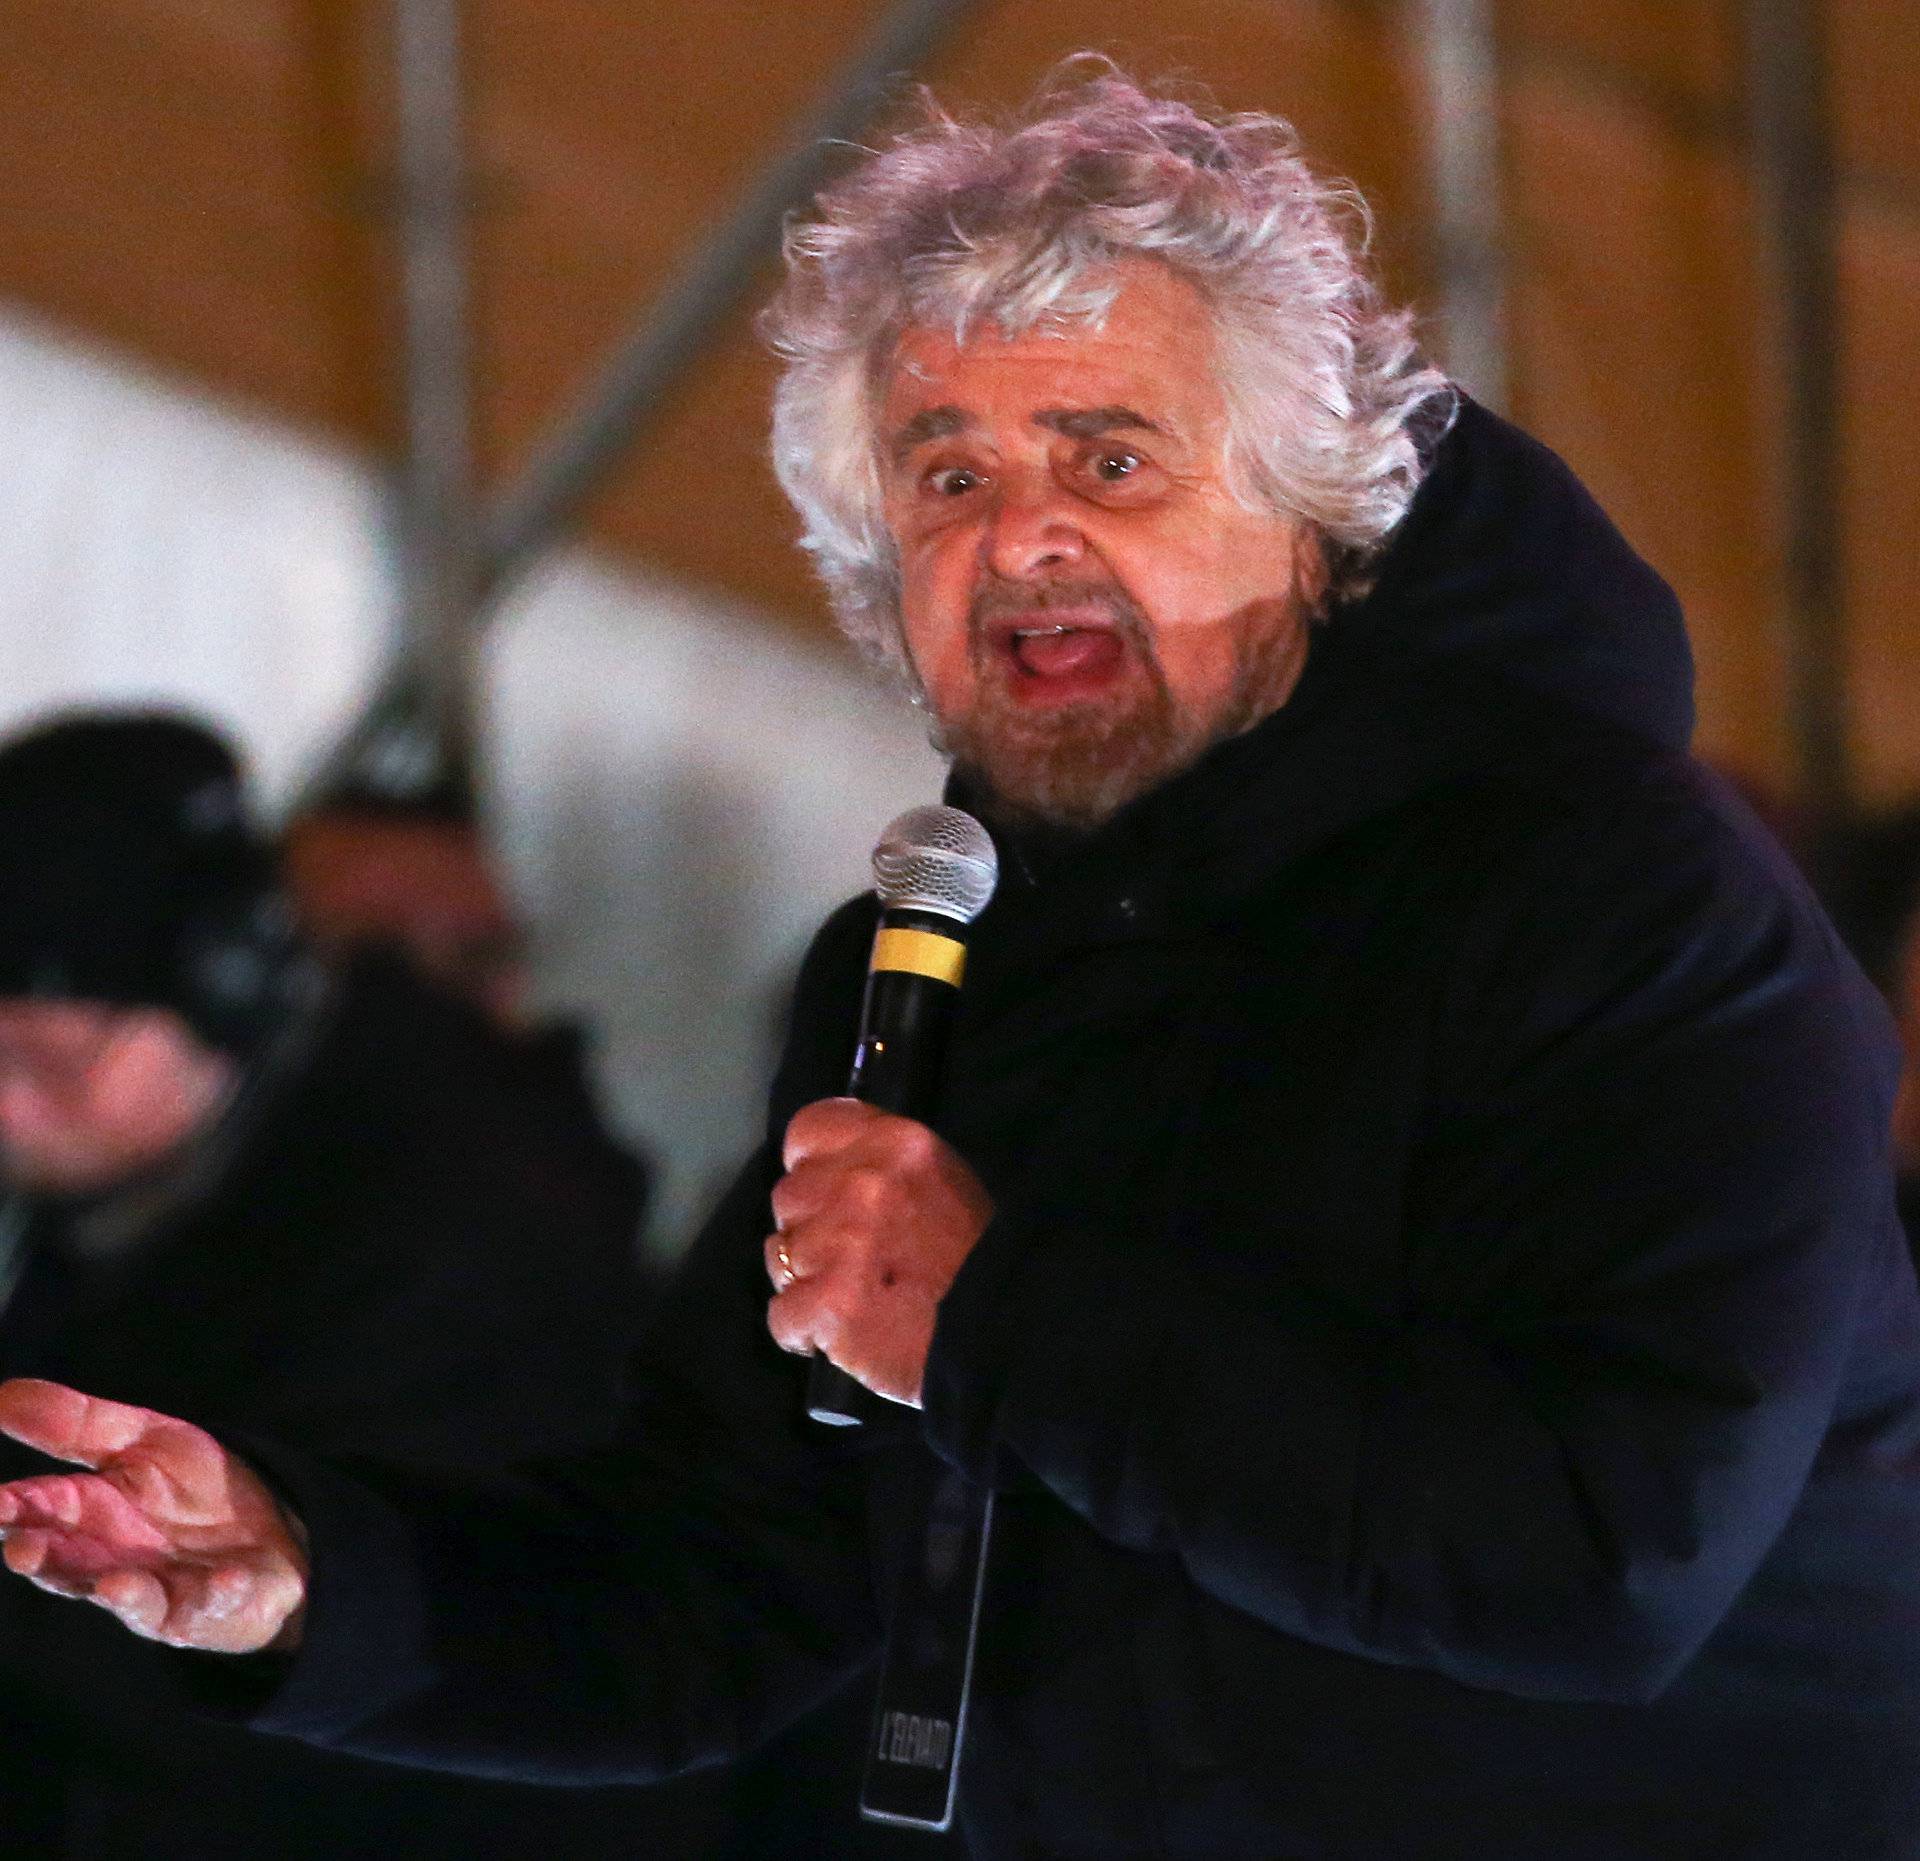 5-Star Movement founder Grillo speaks during the finally rally ahead of the March 4 elections in downtown Rome